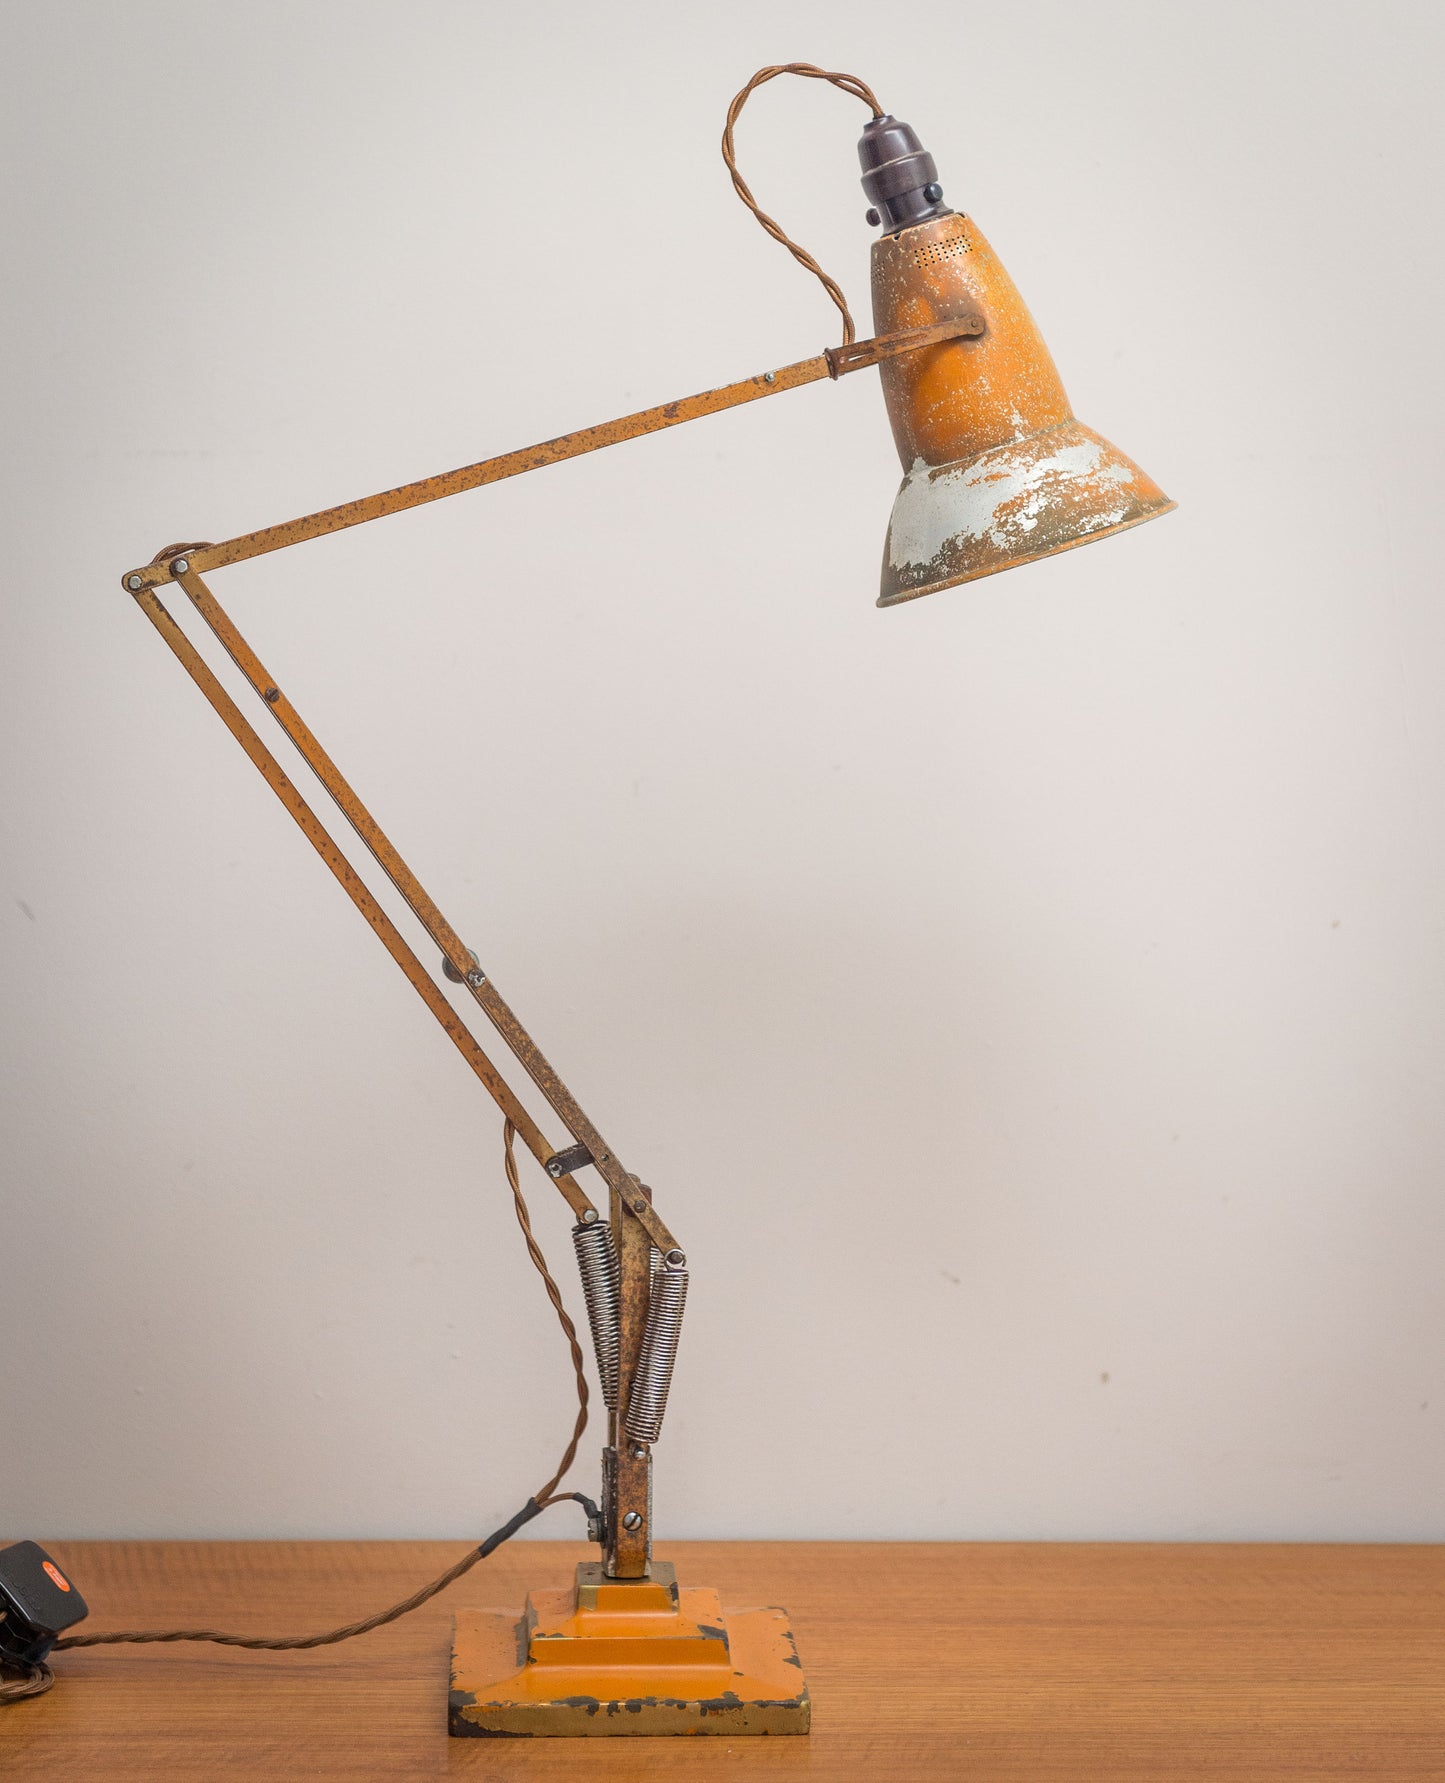 Superb 3 Step Anglepoise 1227 Desk Lamp by  Herbert Terry & sons.